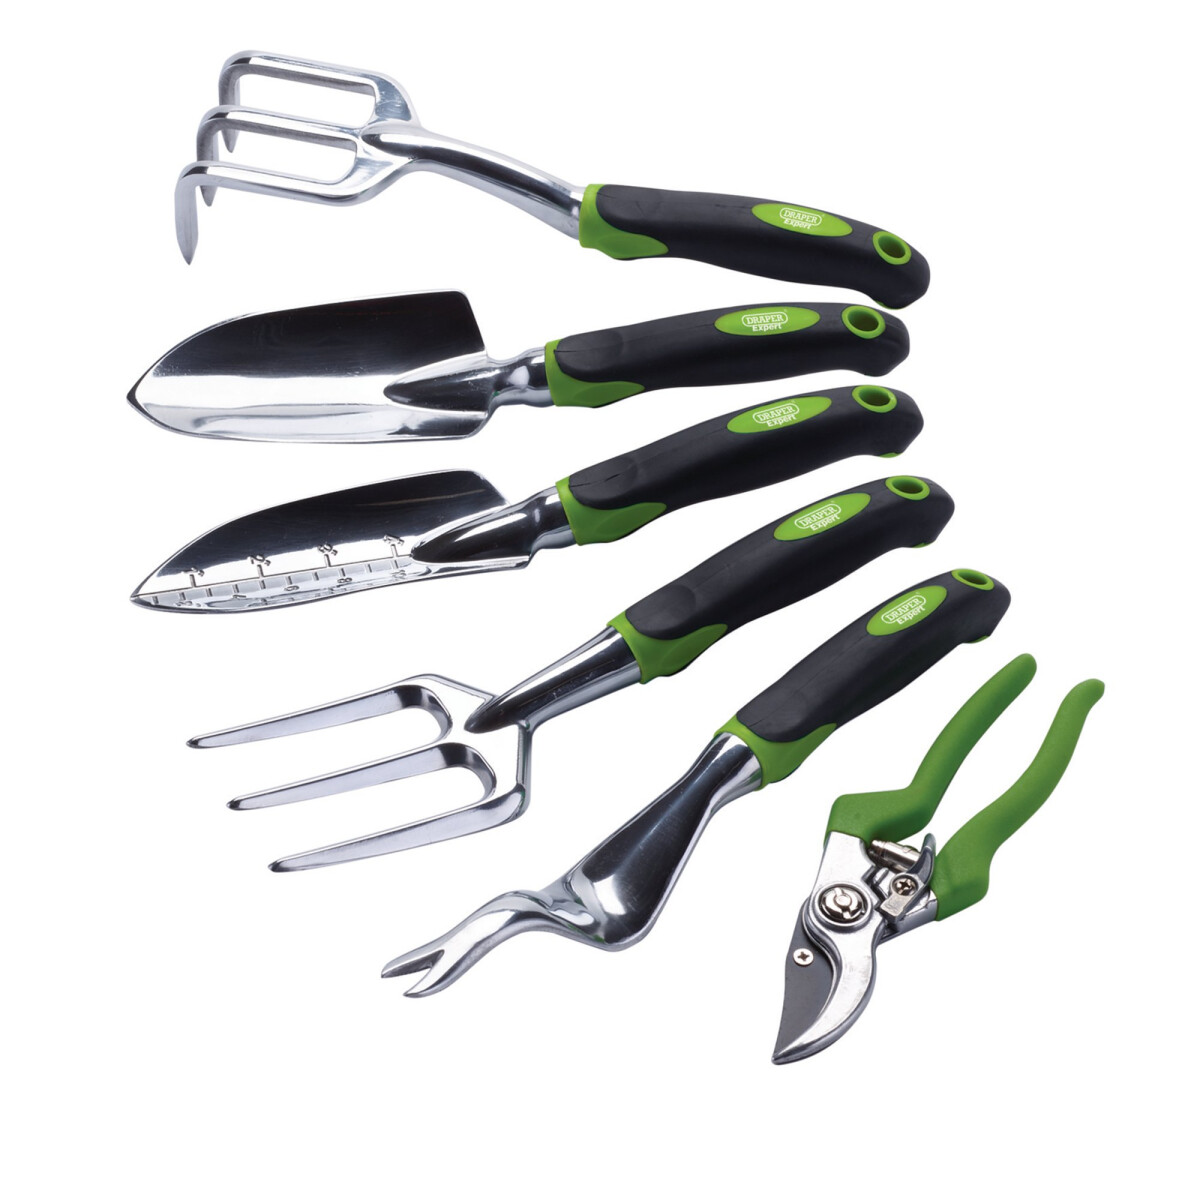 Draper 08996 AGTS/5 Garden Tool Set (6 Piece) from Lawson HIS